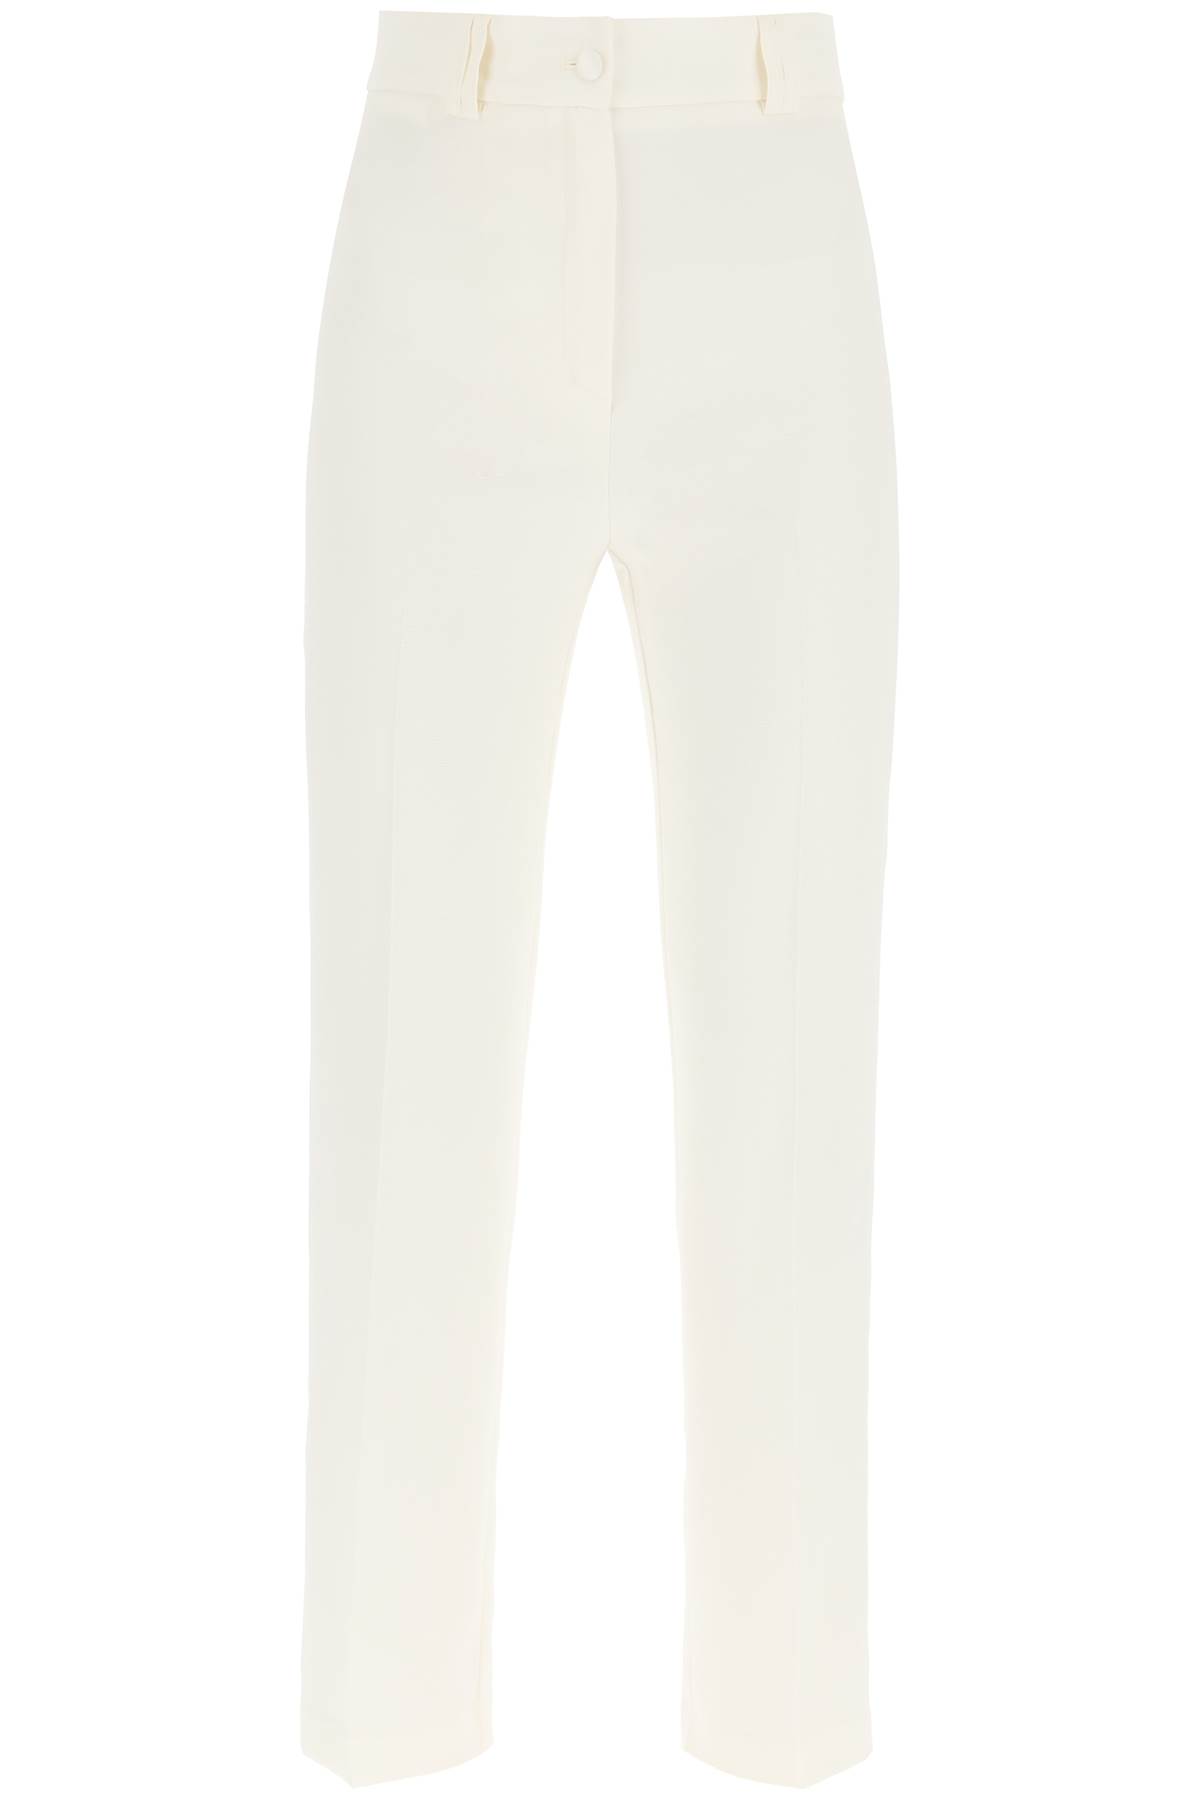 HEBE STUDIO LOULOU CADY TROUSERS